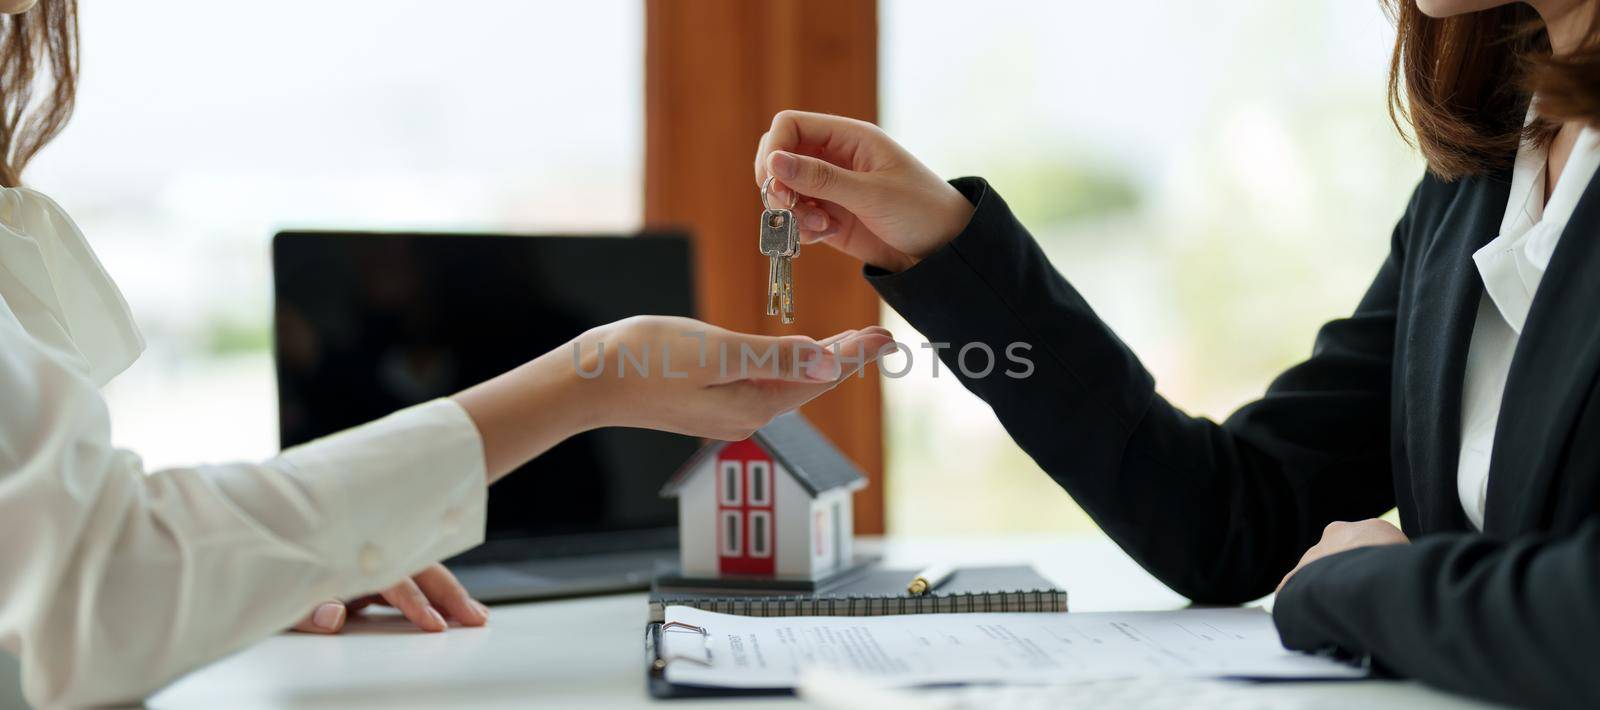 real estate agent holding house key to his client after signing contract agreement in office,concept for real estate, moving home or renting property by nateemee